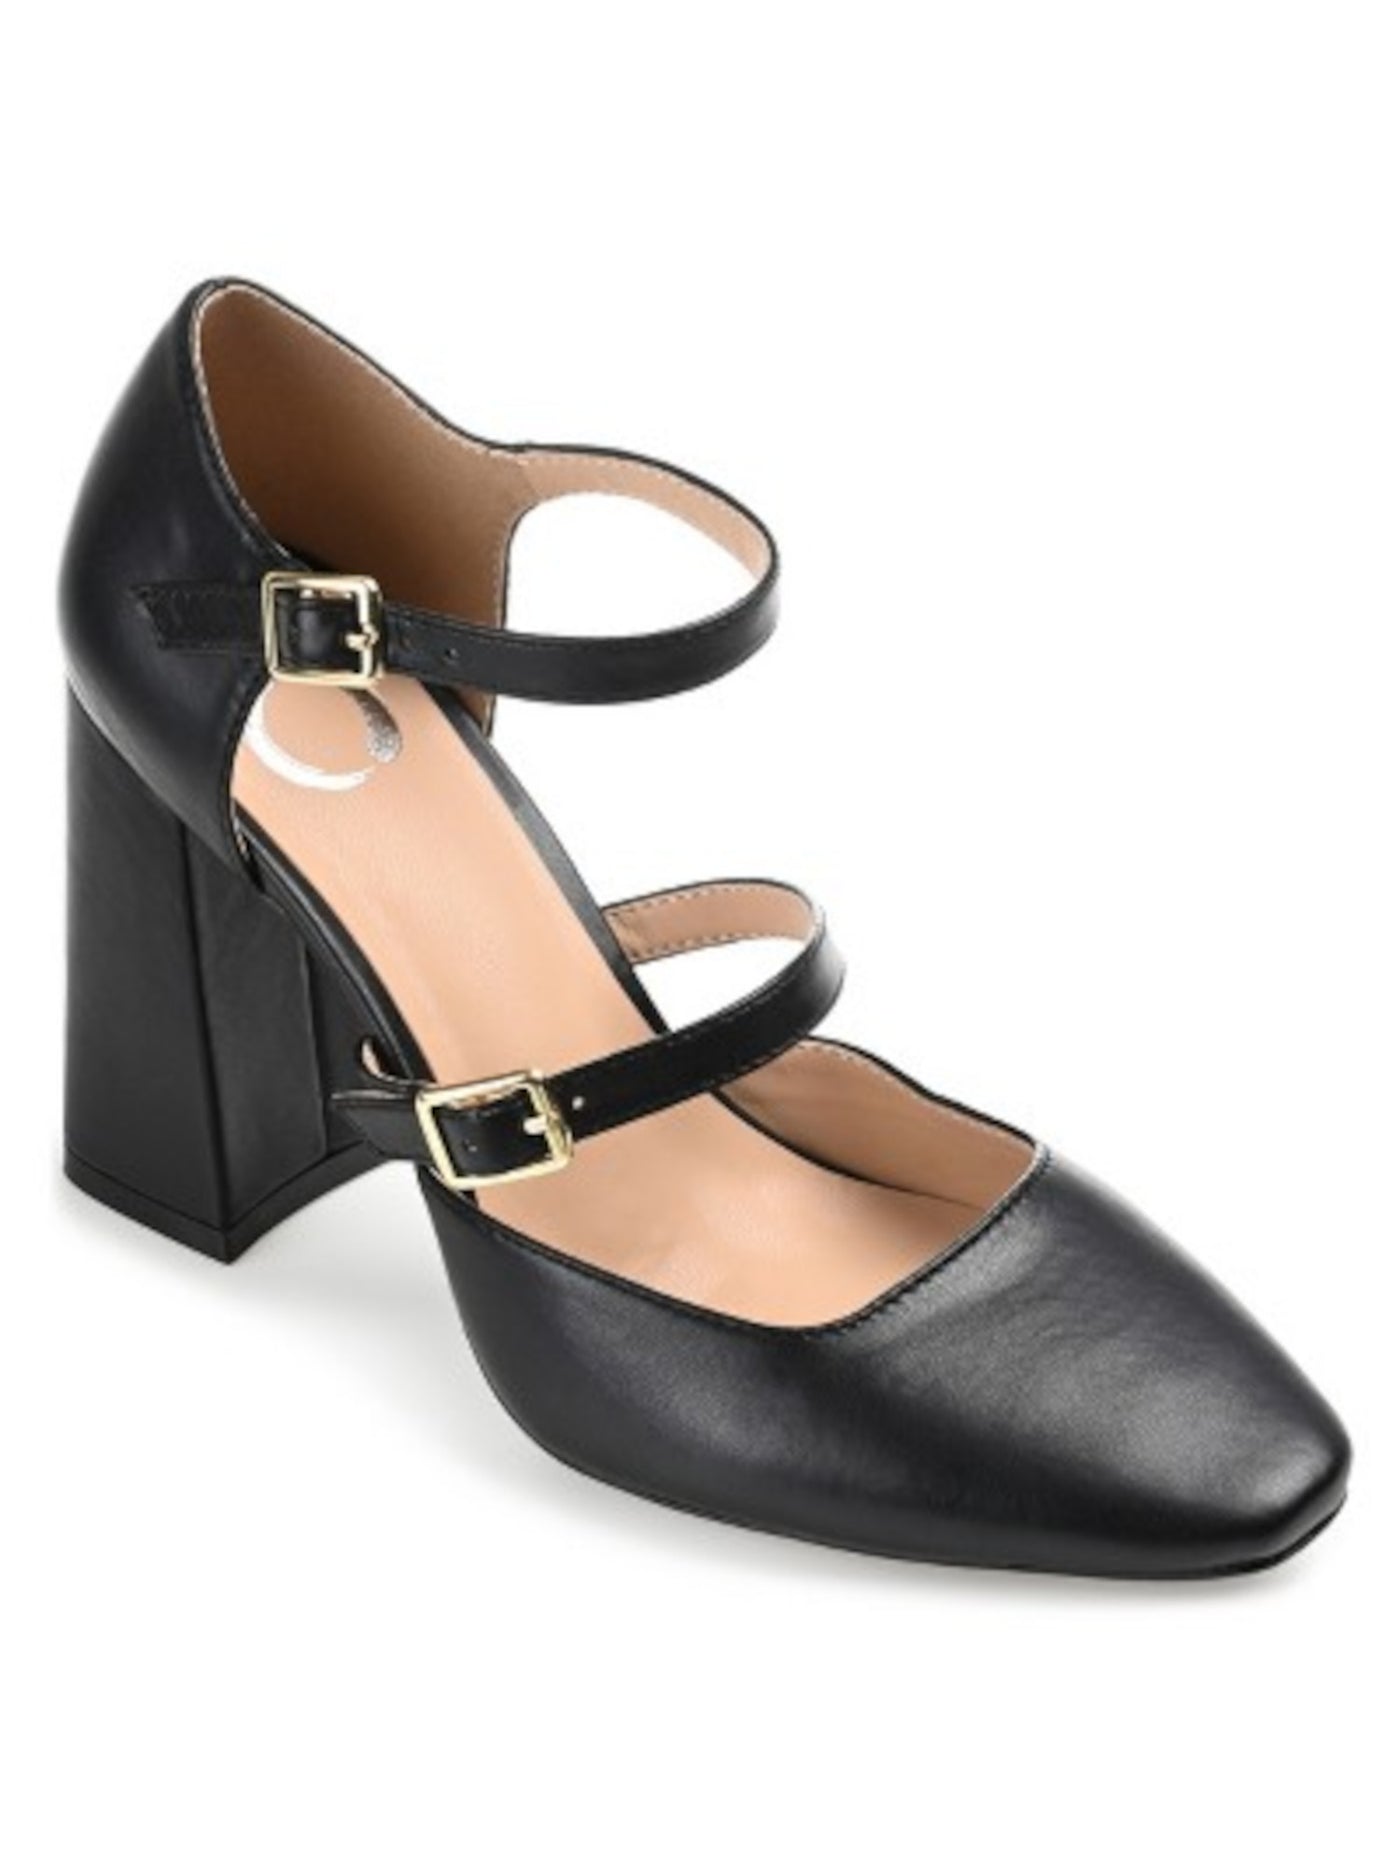 JOURNEE COLLECTION Womens Black Twin Buckle Straps Mary Jane Padded Isadorah Square Toe Block Heel Buckle Pumps Shoes 8